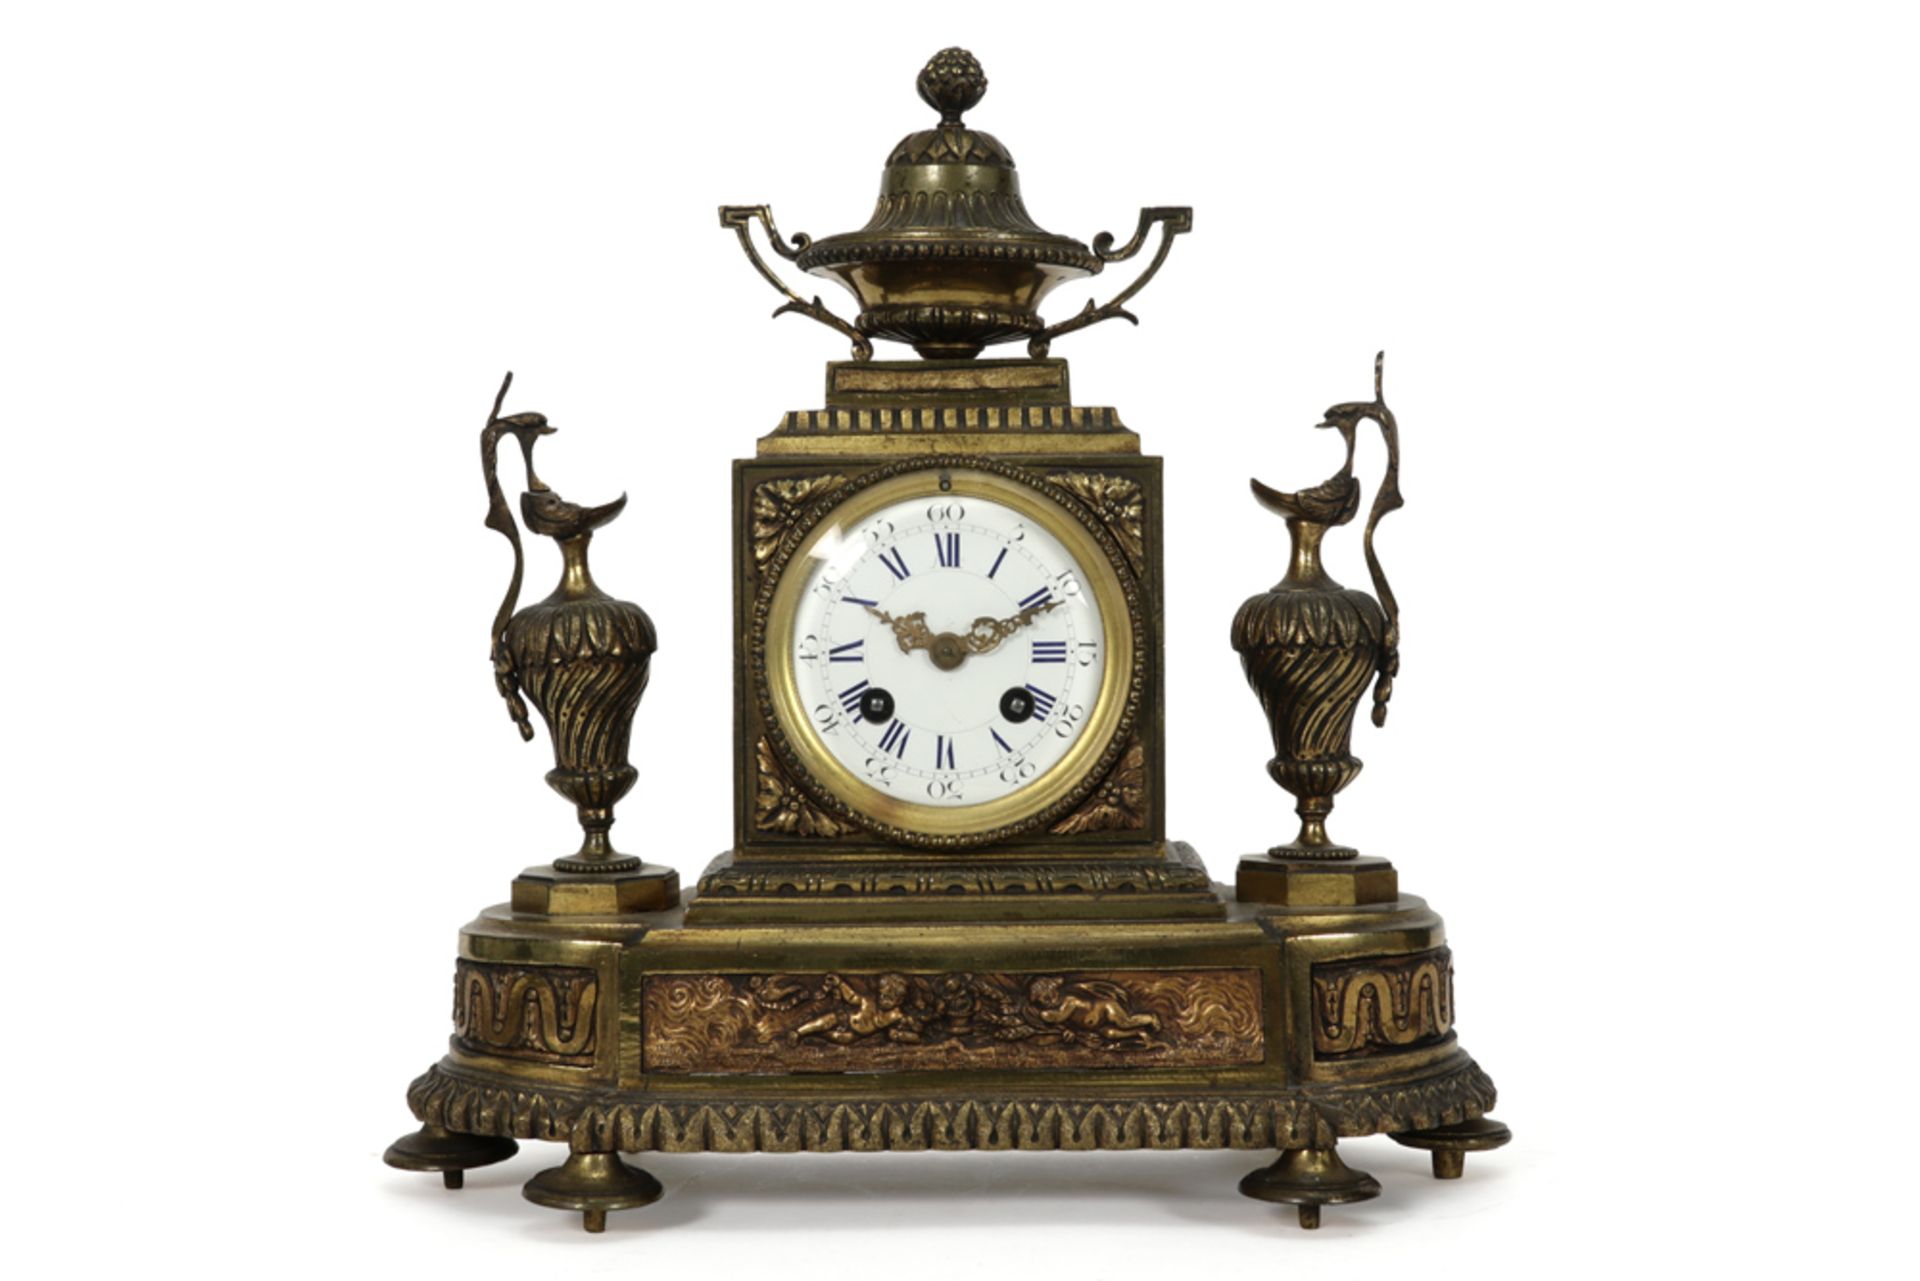 19th Cent. French neoclassical clock with its case in gilded bronze and with a Japy frêres & Cie